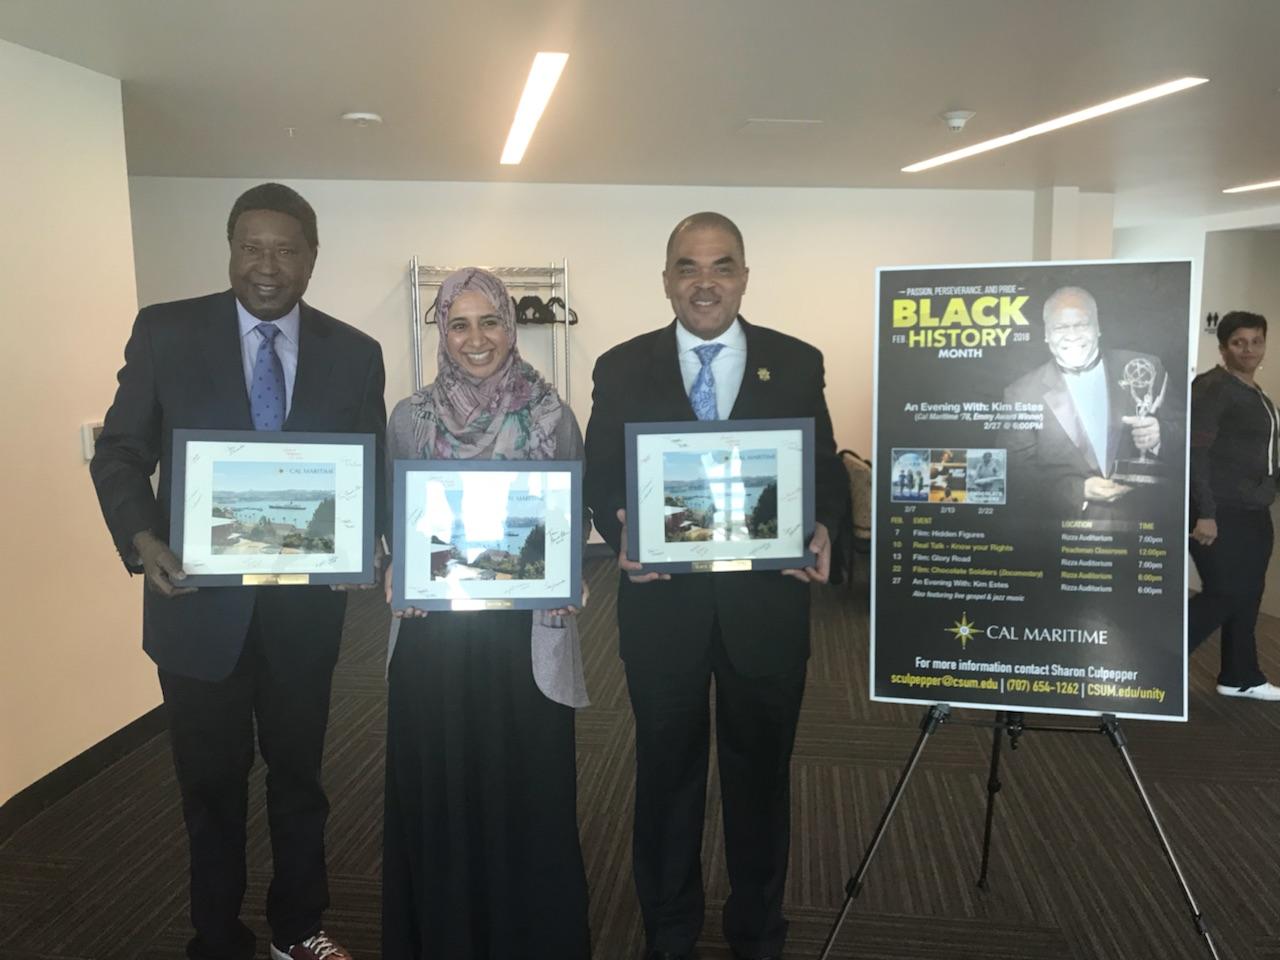  Civil Rights Attorney John Burris, Executive Director of the Council on American-Islamic Relations Zahra Billoo, and Cal Maritime Chief of Police Donny Gordon